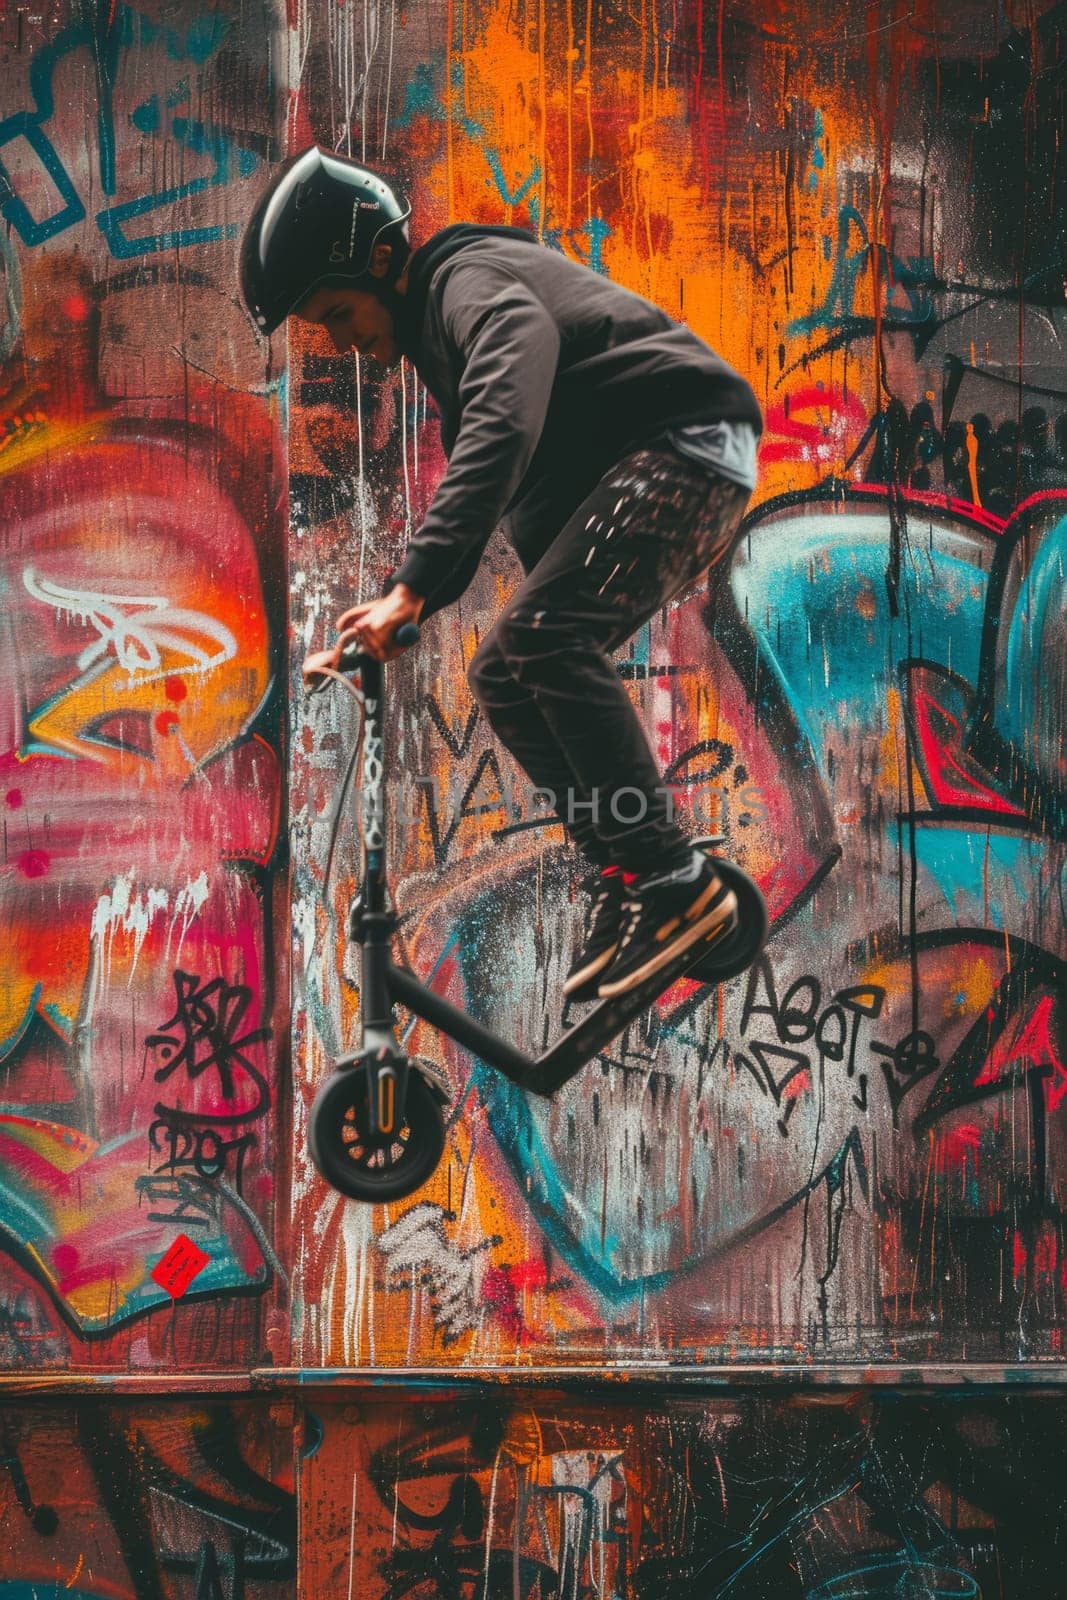 A scooter rider mid-air performing a trick against a colorful graffiti wall